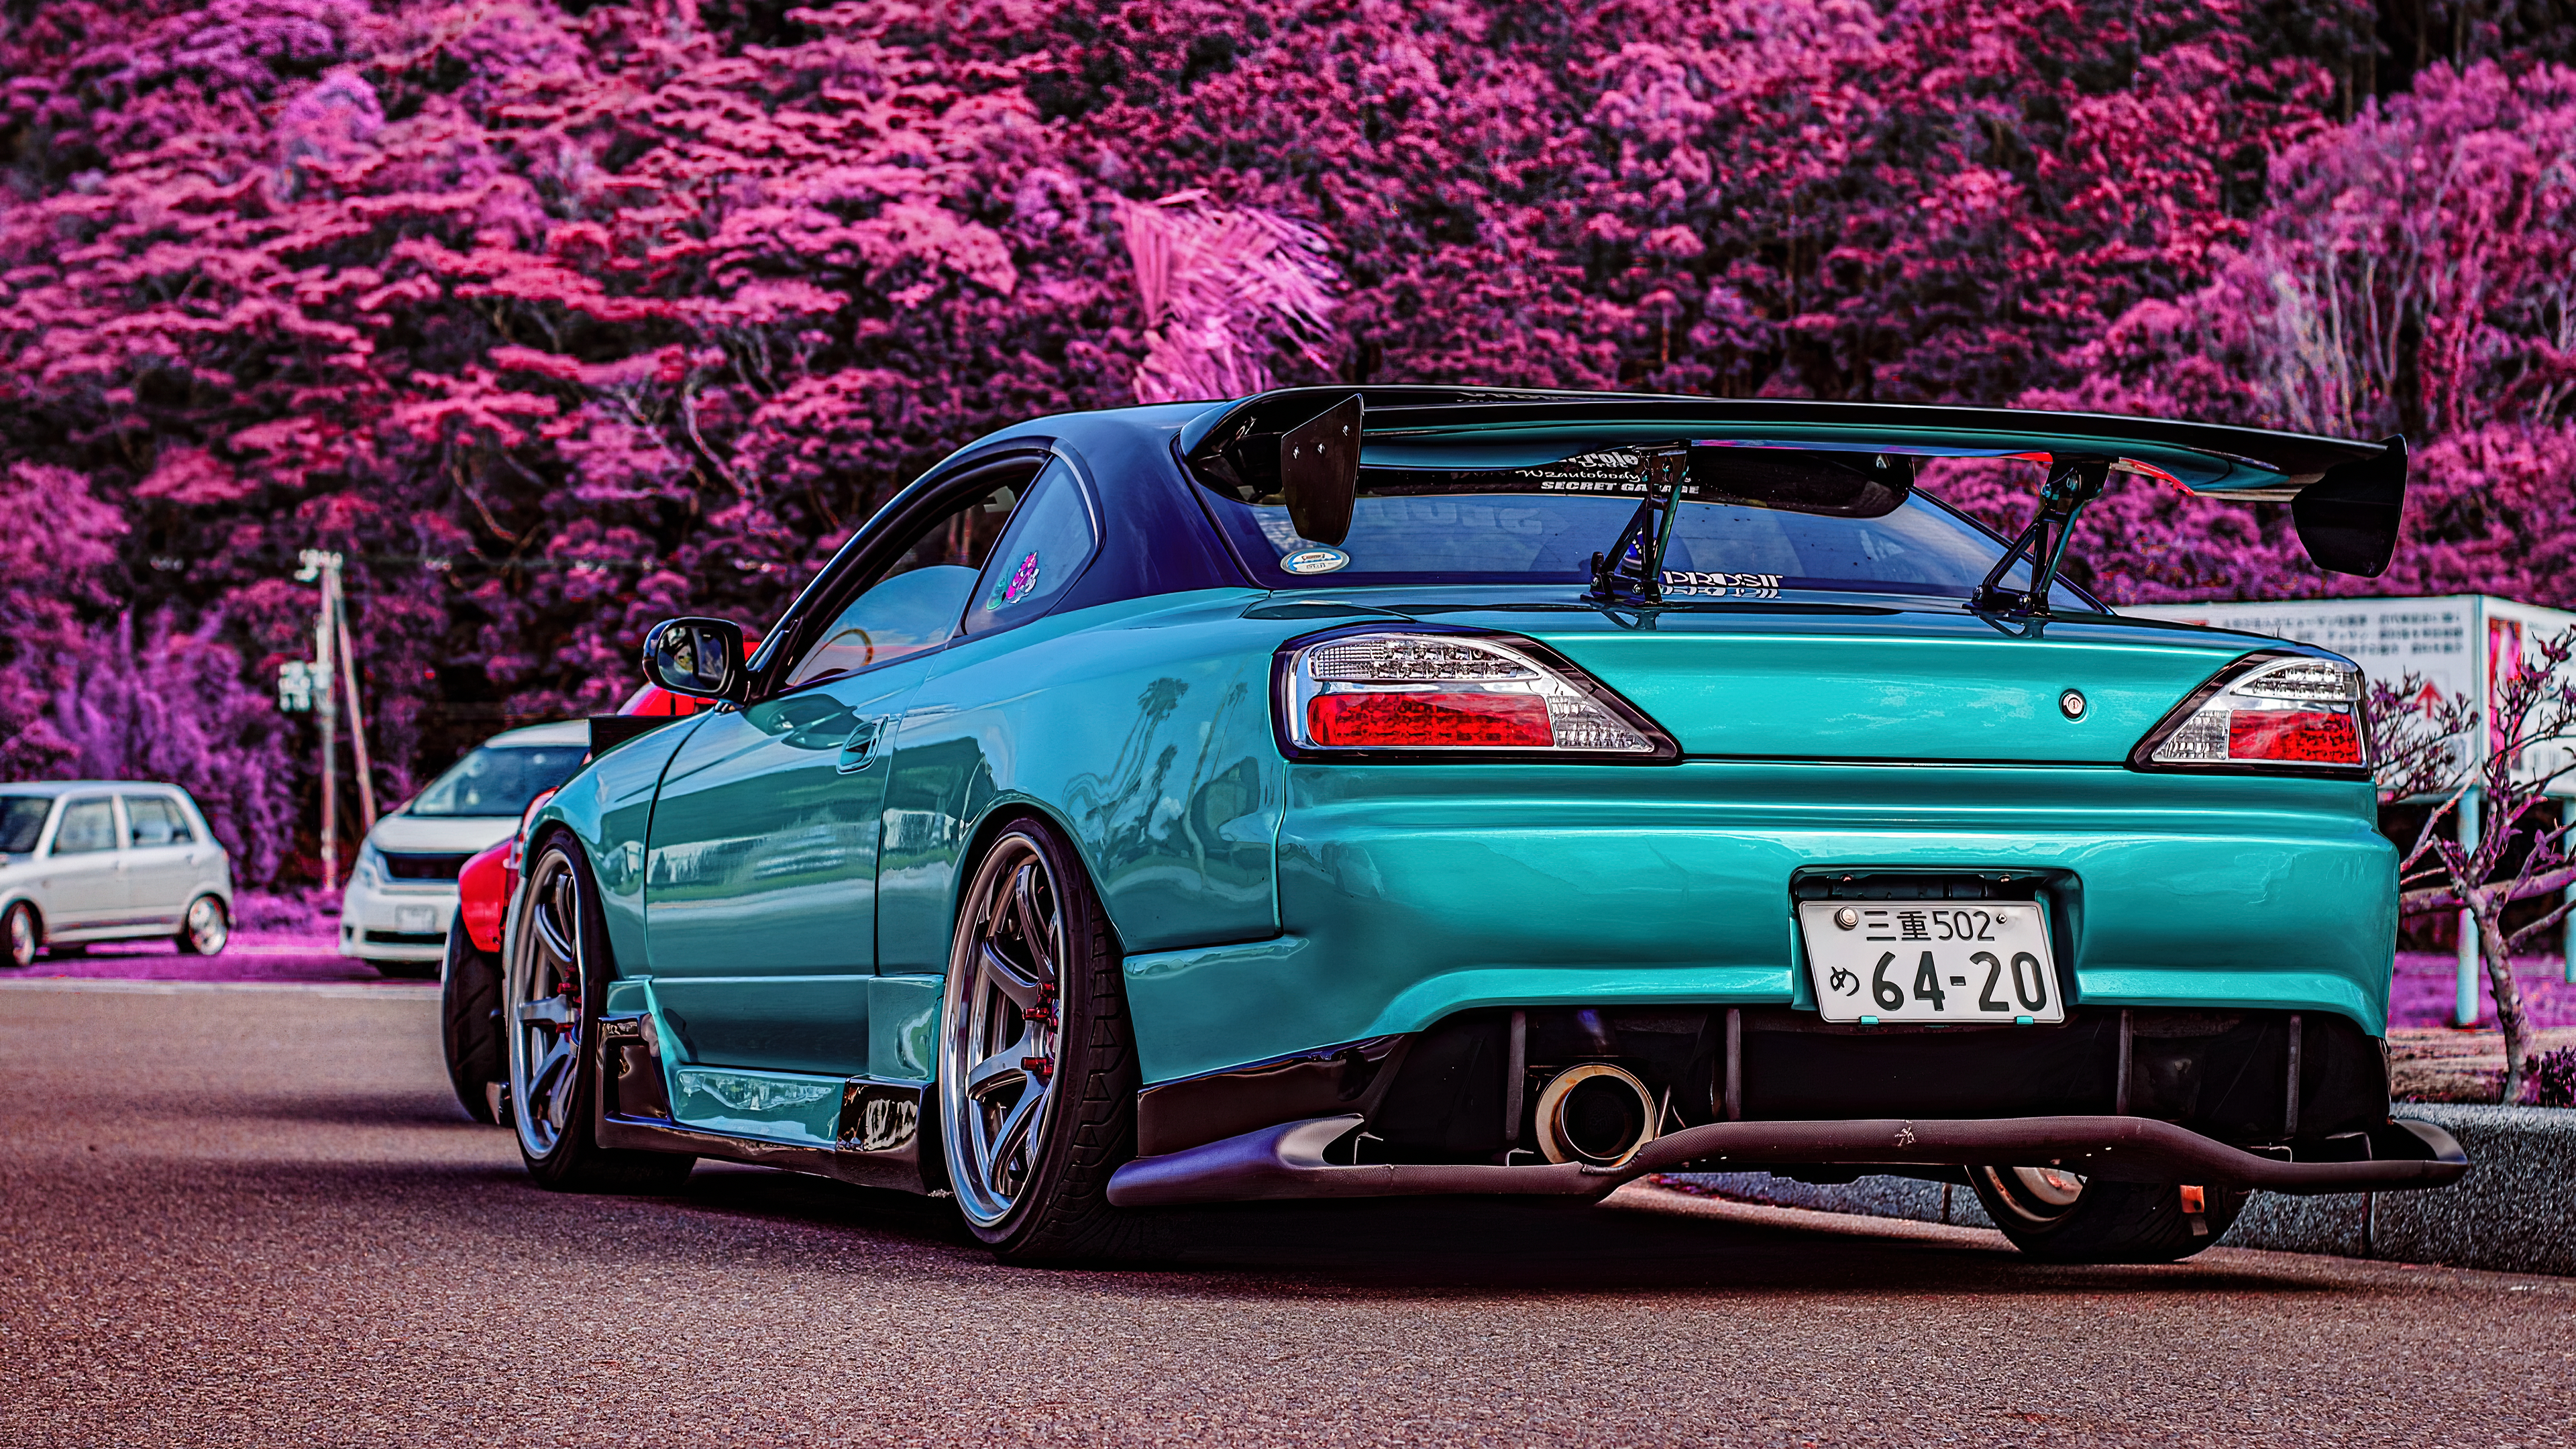 3840x2160 Nissan S15 Silvia Cyan by @erika69057910 [] : r/wallpapers